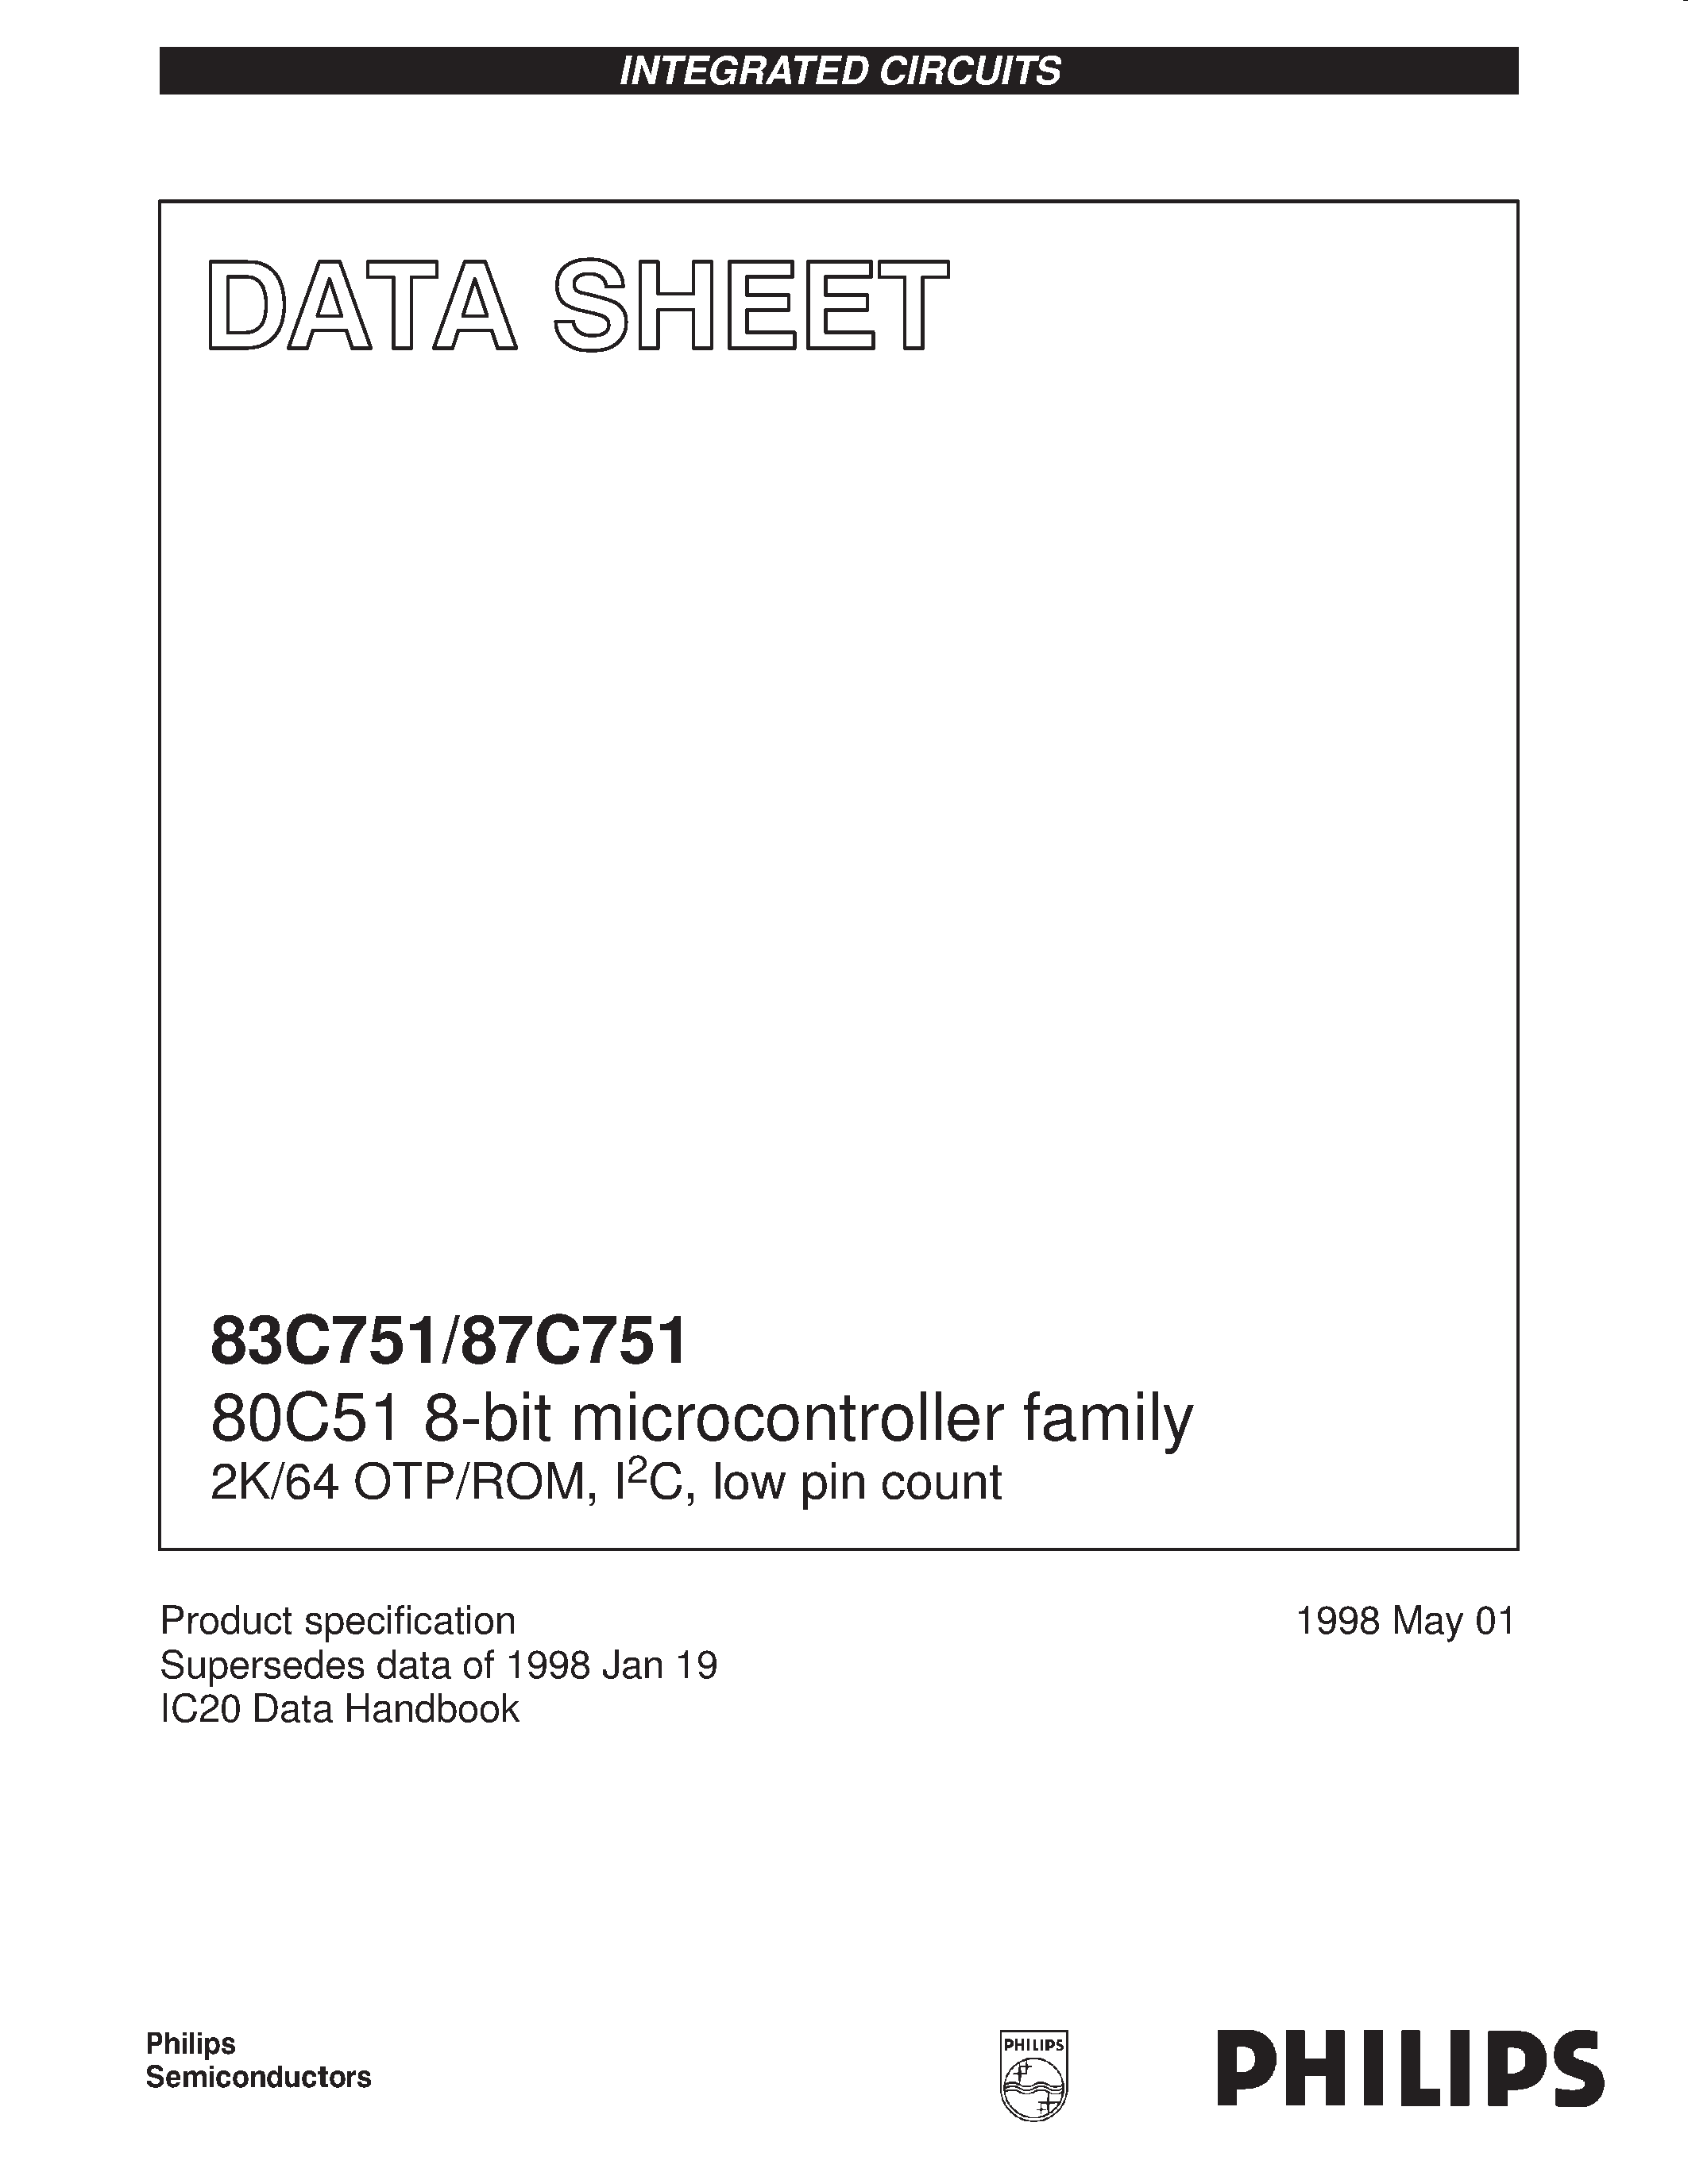 Datasheet S87C751-1N24 - 80C51 8-bit microcontroller family 2K/64 OTP/ROM / I2C / low pin count page 1